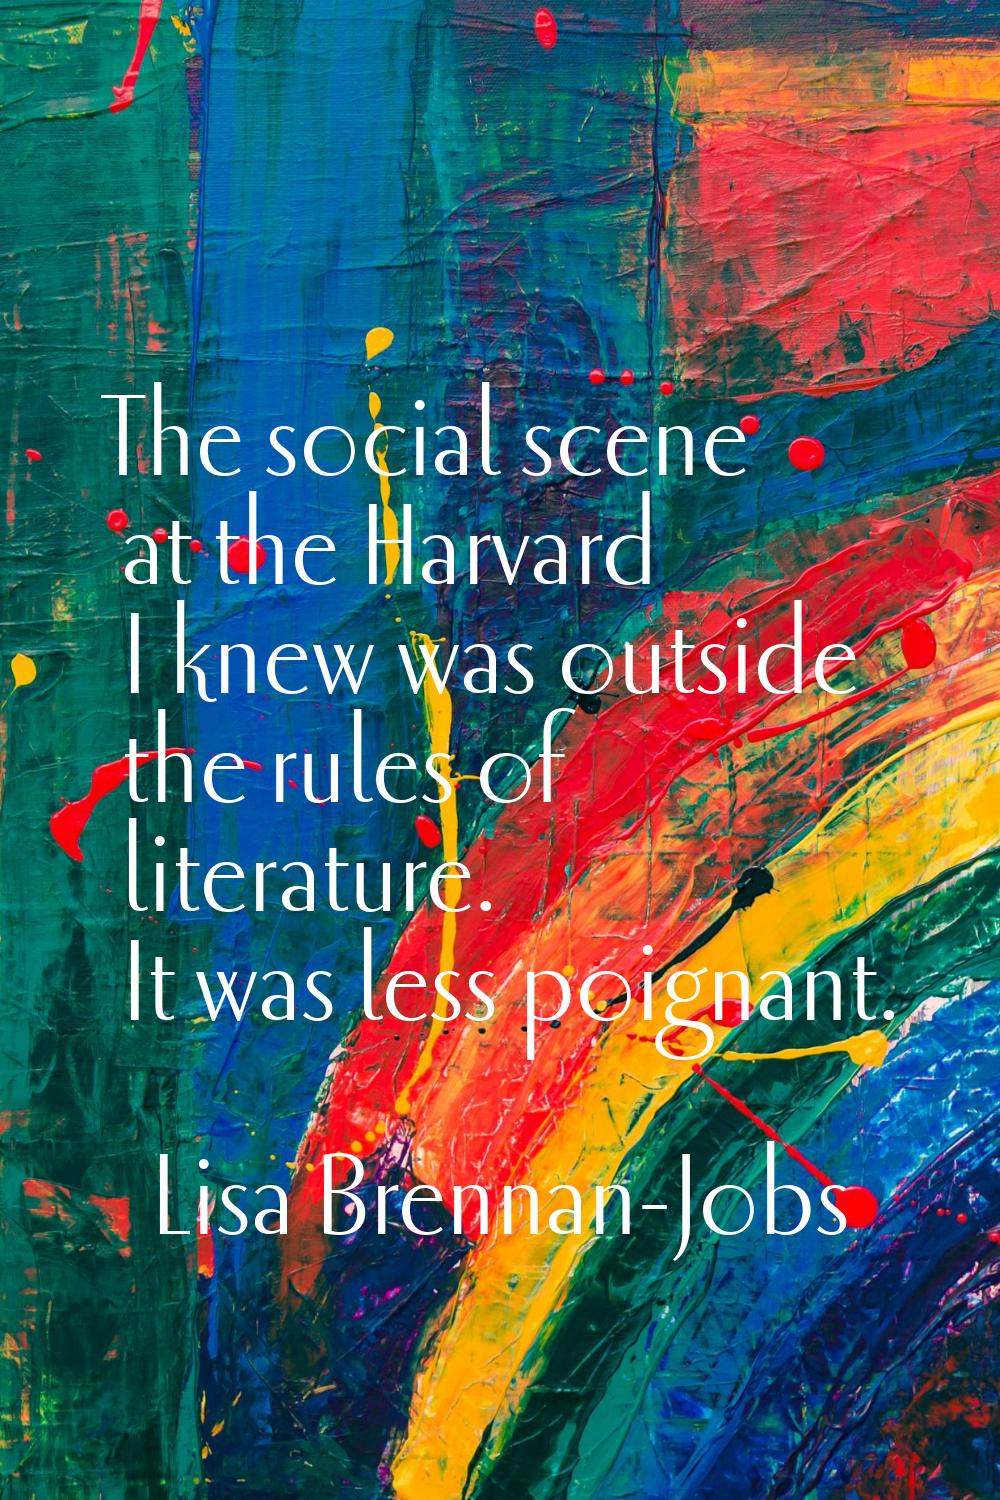 The social scene at the Harvard I knew was outside the rules of literature. It was less poignant.